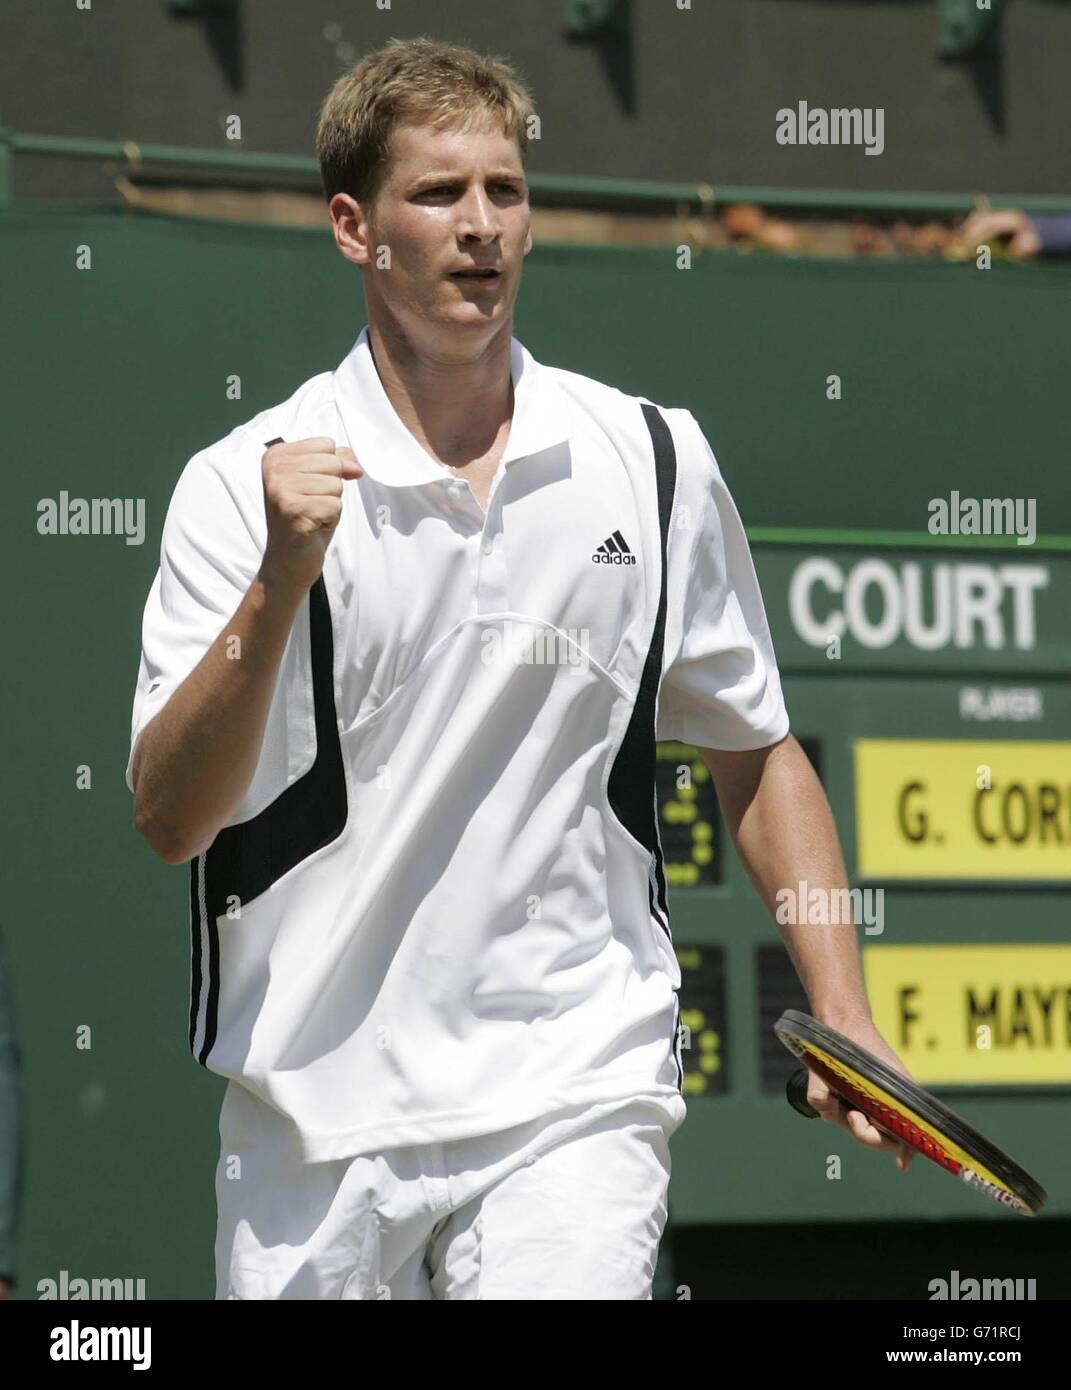 Florian Mayer from Germany punches the air after defeating the number three seed Guillermo Coria from Argentina at The Lawn Tennis Championships in Wimbledon, London. Mayer won in four sets 4:6/6:3/6:3/6:4. Stock Photo